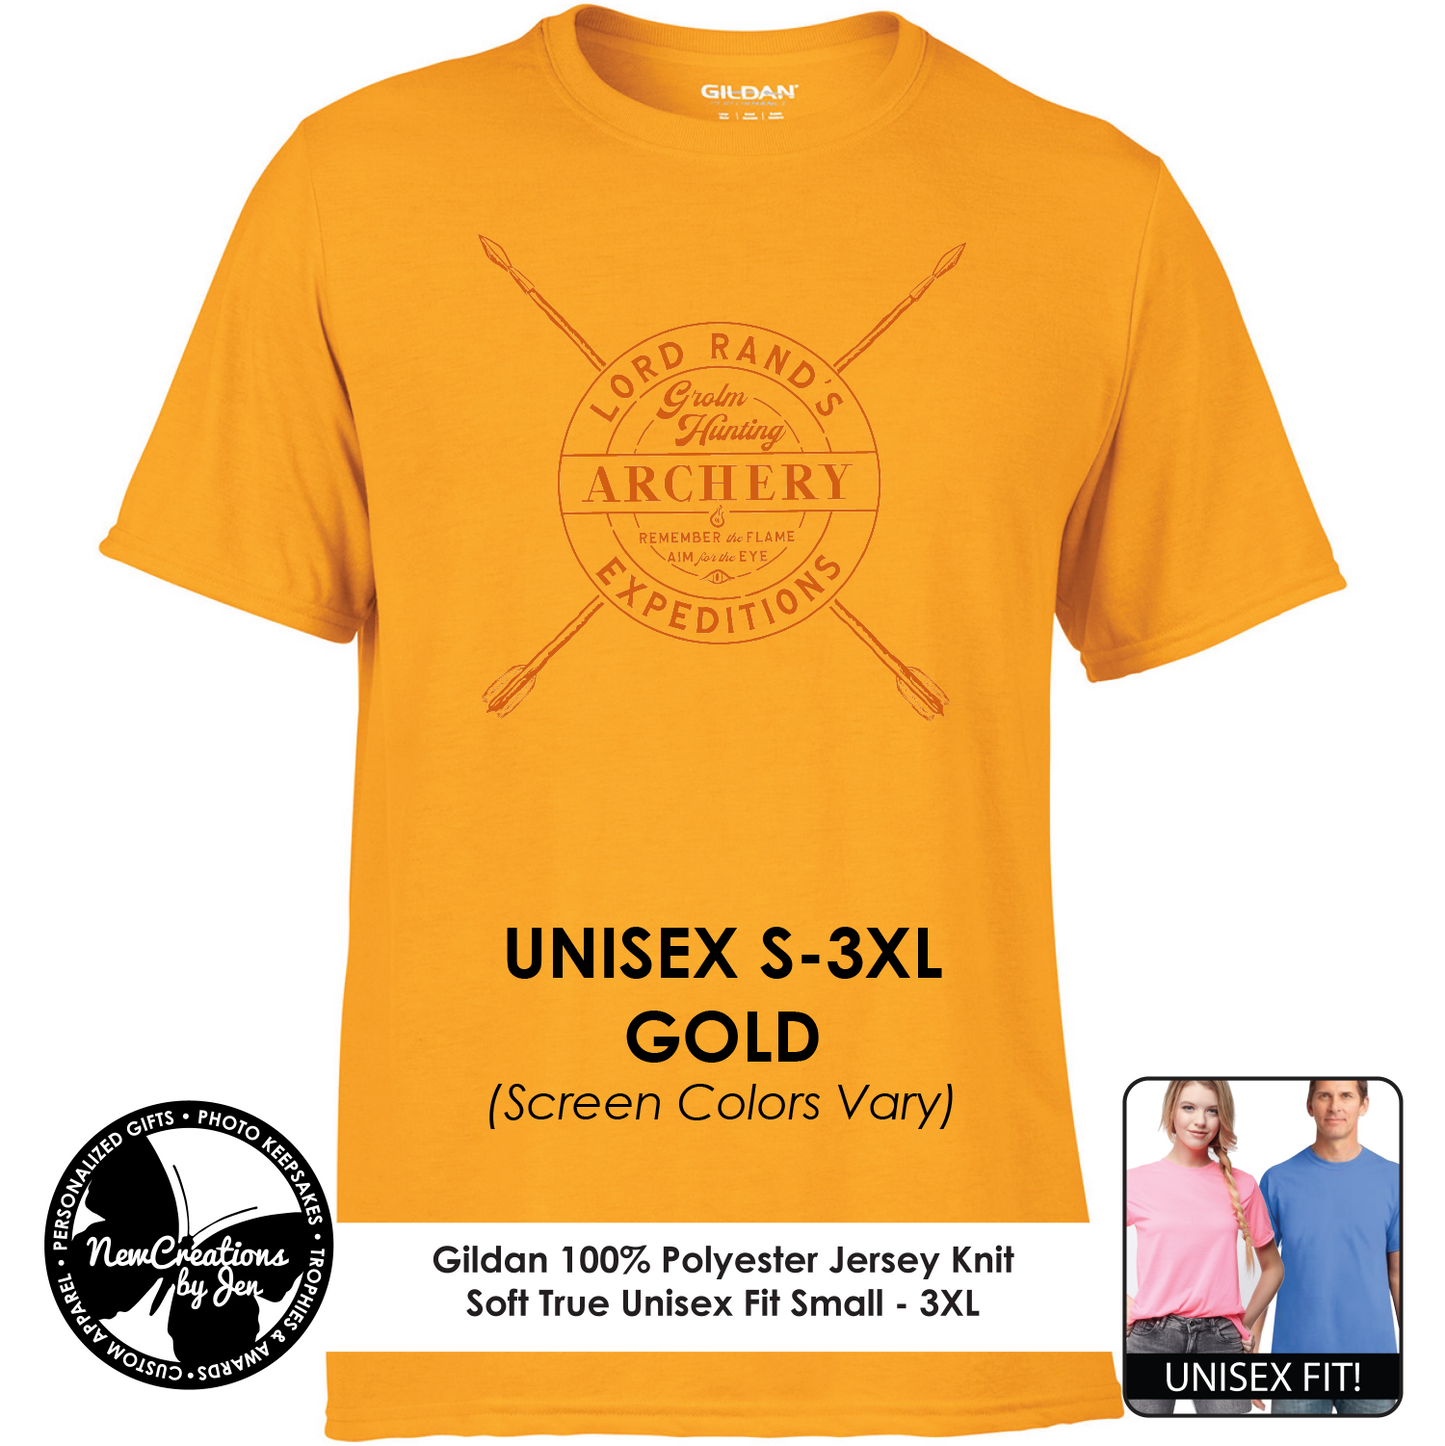 Lord Rand's Archery Expeditions - Wheel of Time Inspired  Souvenir Lightweight  Tees